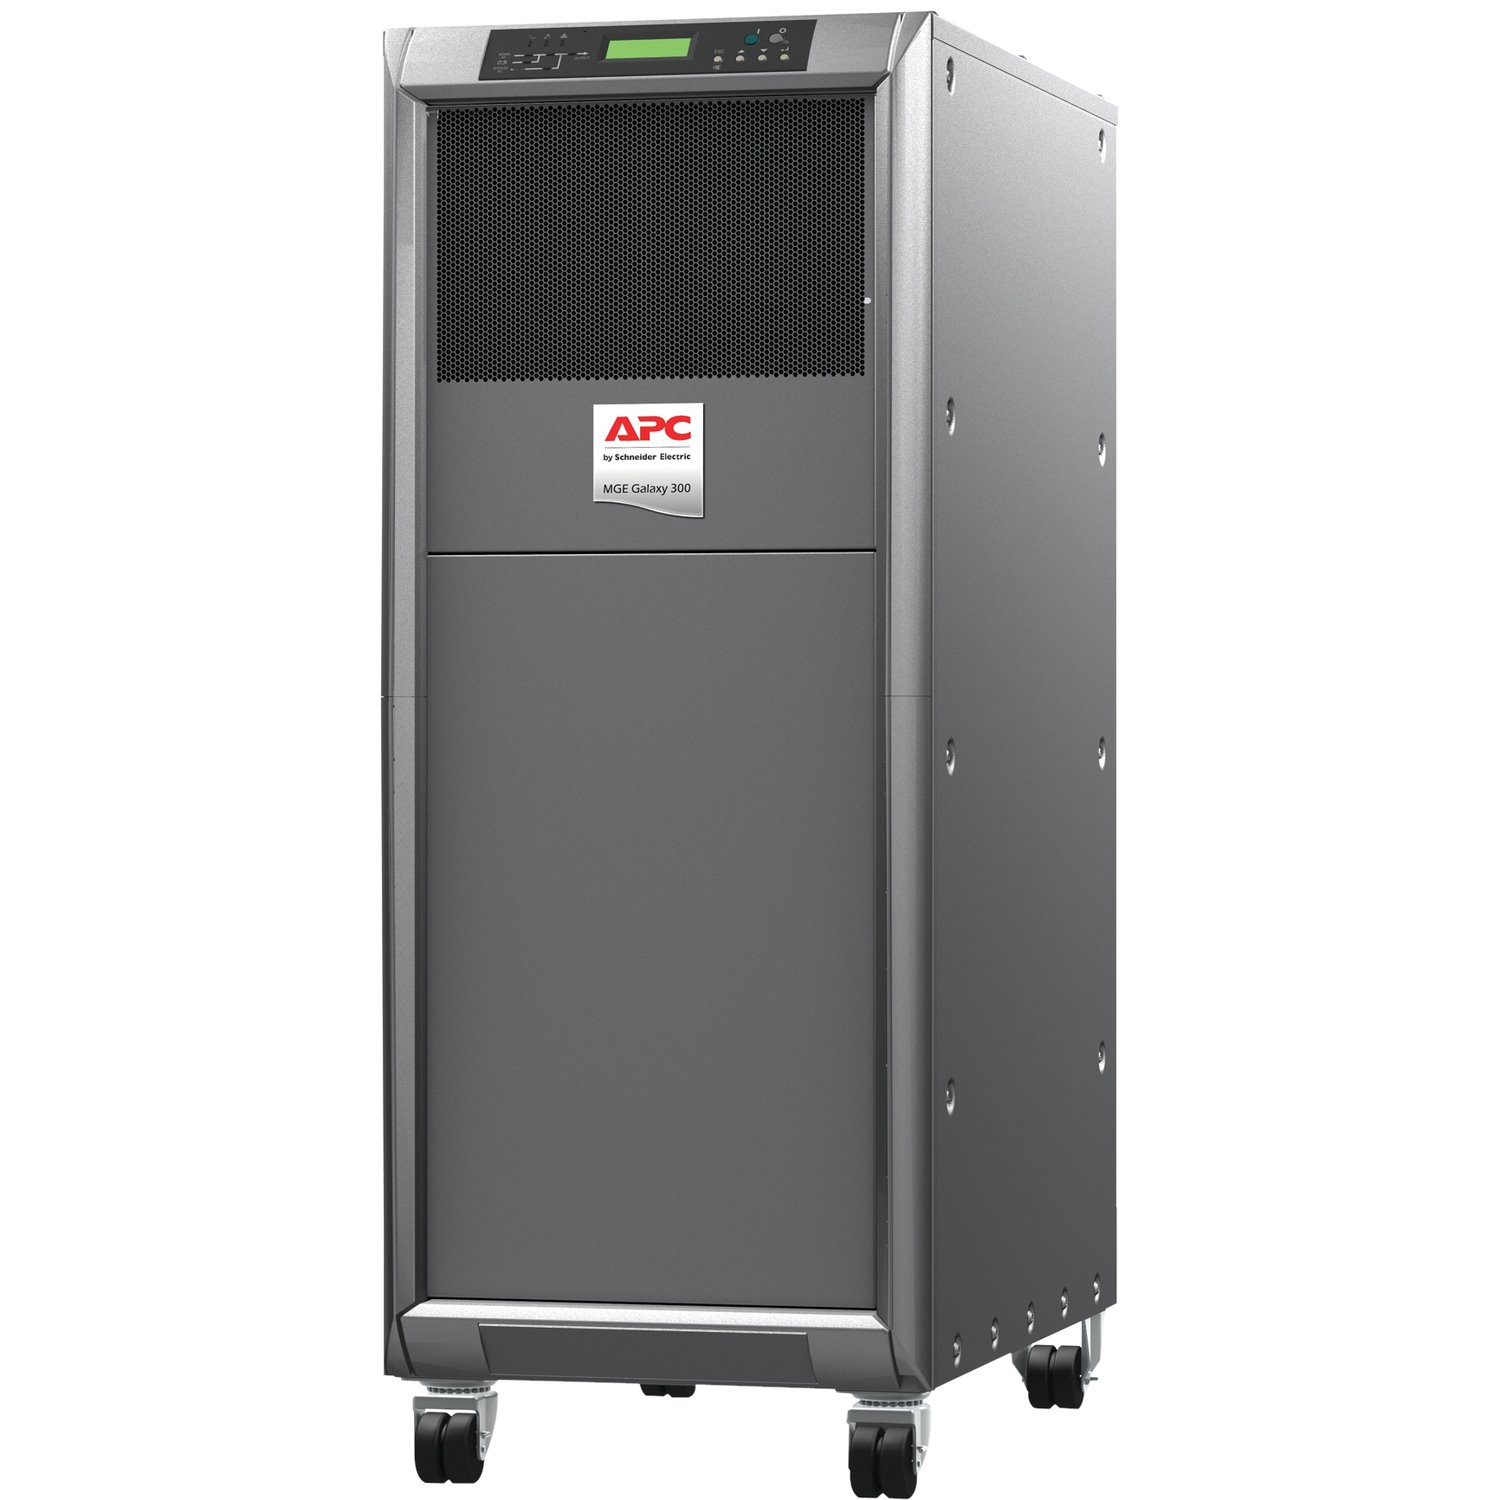 APC by Schneider Electric MGE Galaxy Double Conversion Online UPS - 10 kVA